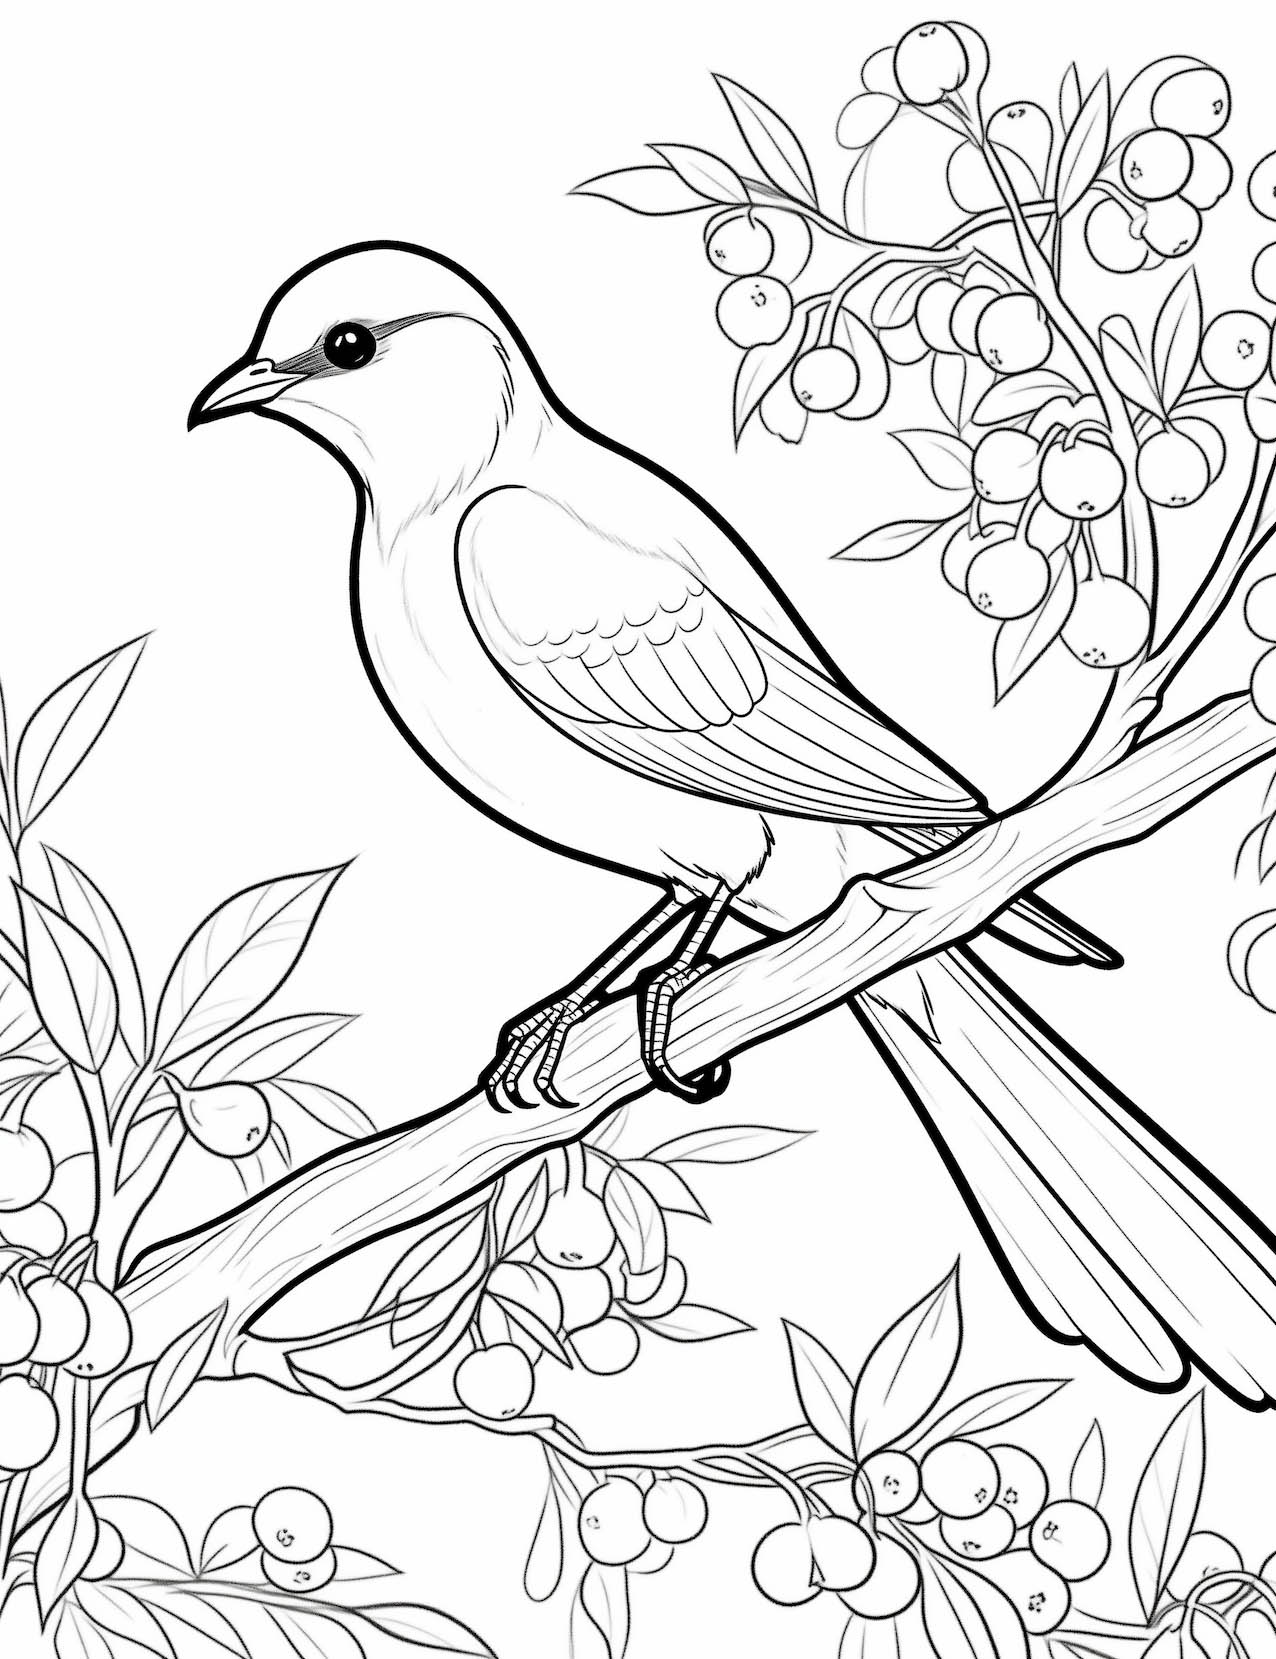 Bird coloring pages for kids and adults